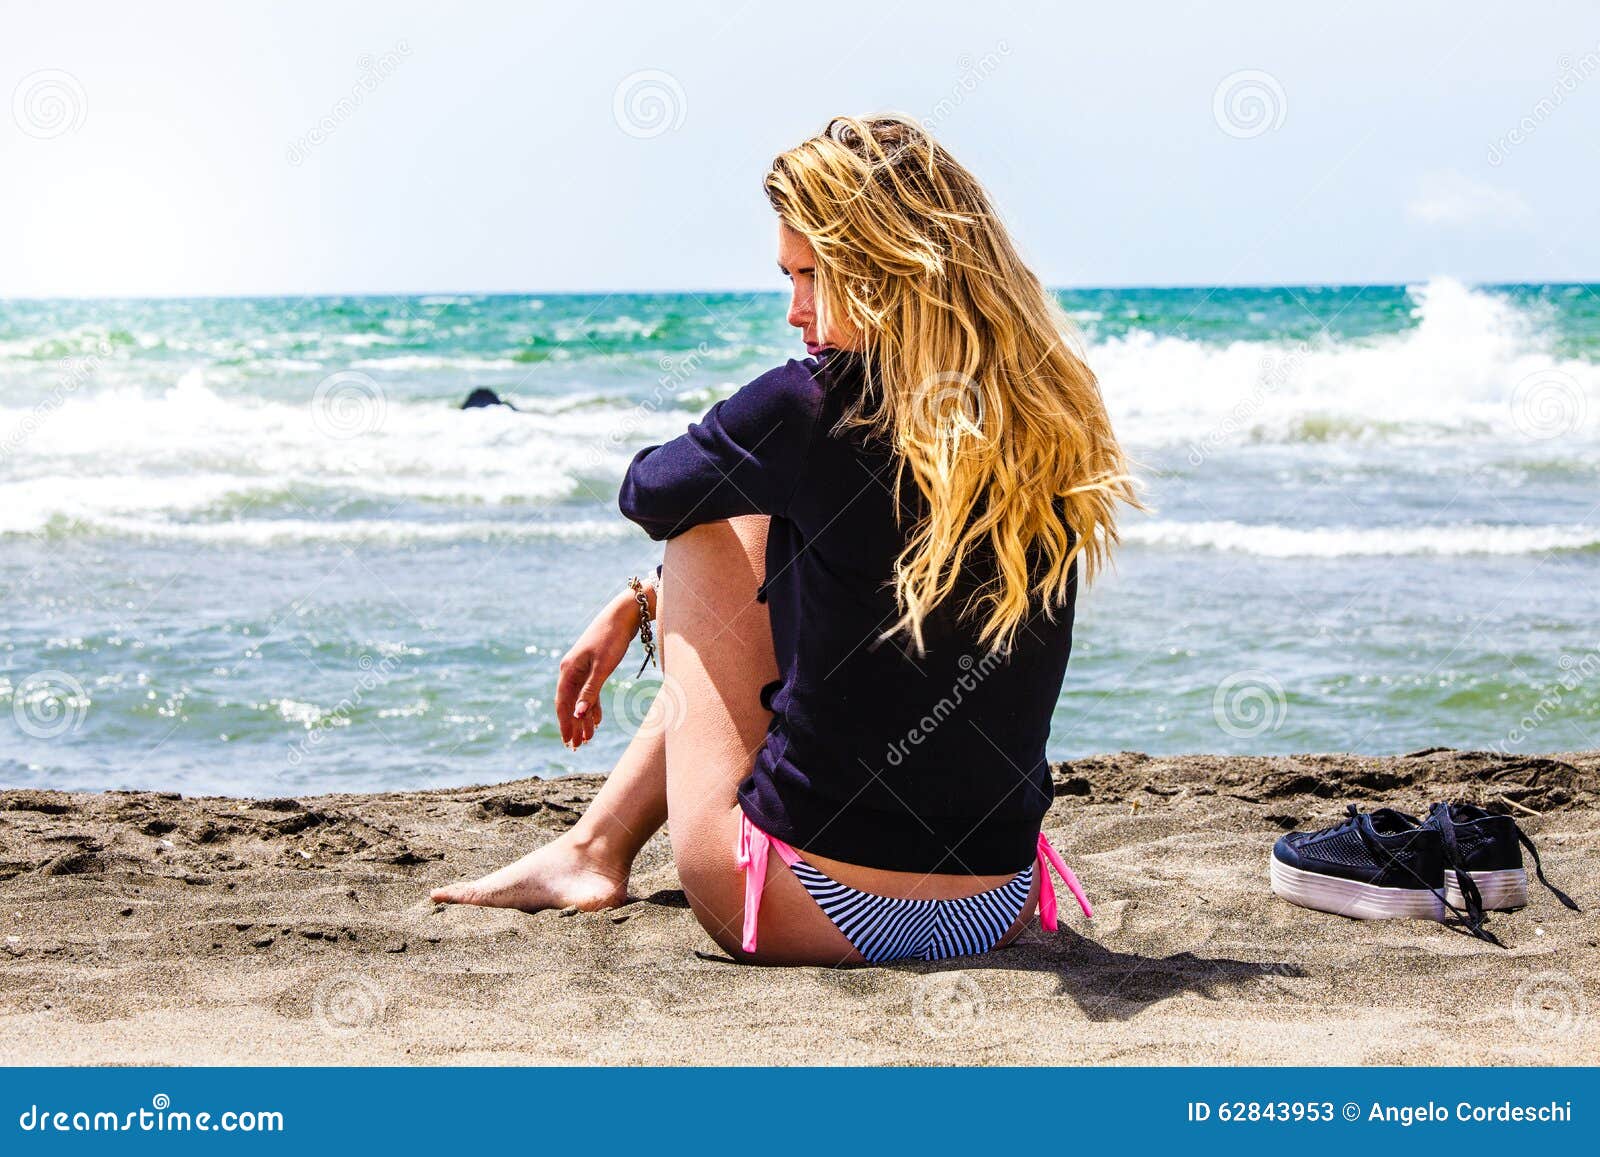 Lonely Girl Sitting at the Beach with Sea. Thoughtful and Loving ...